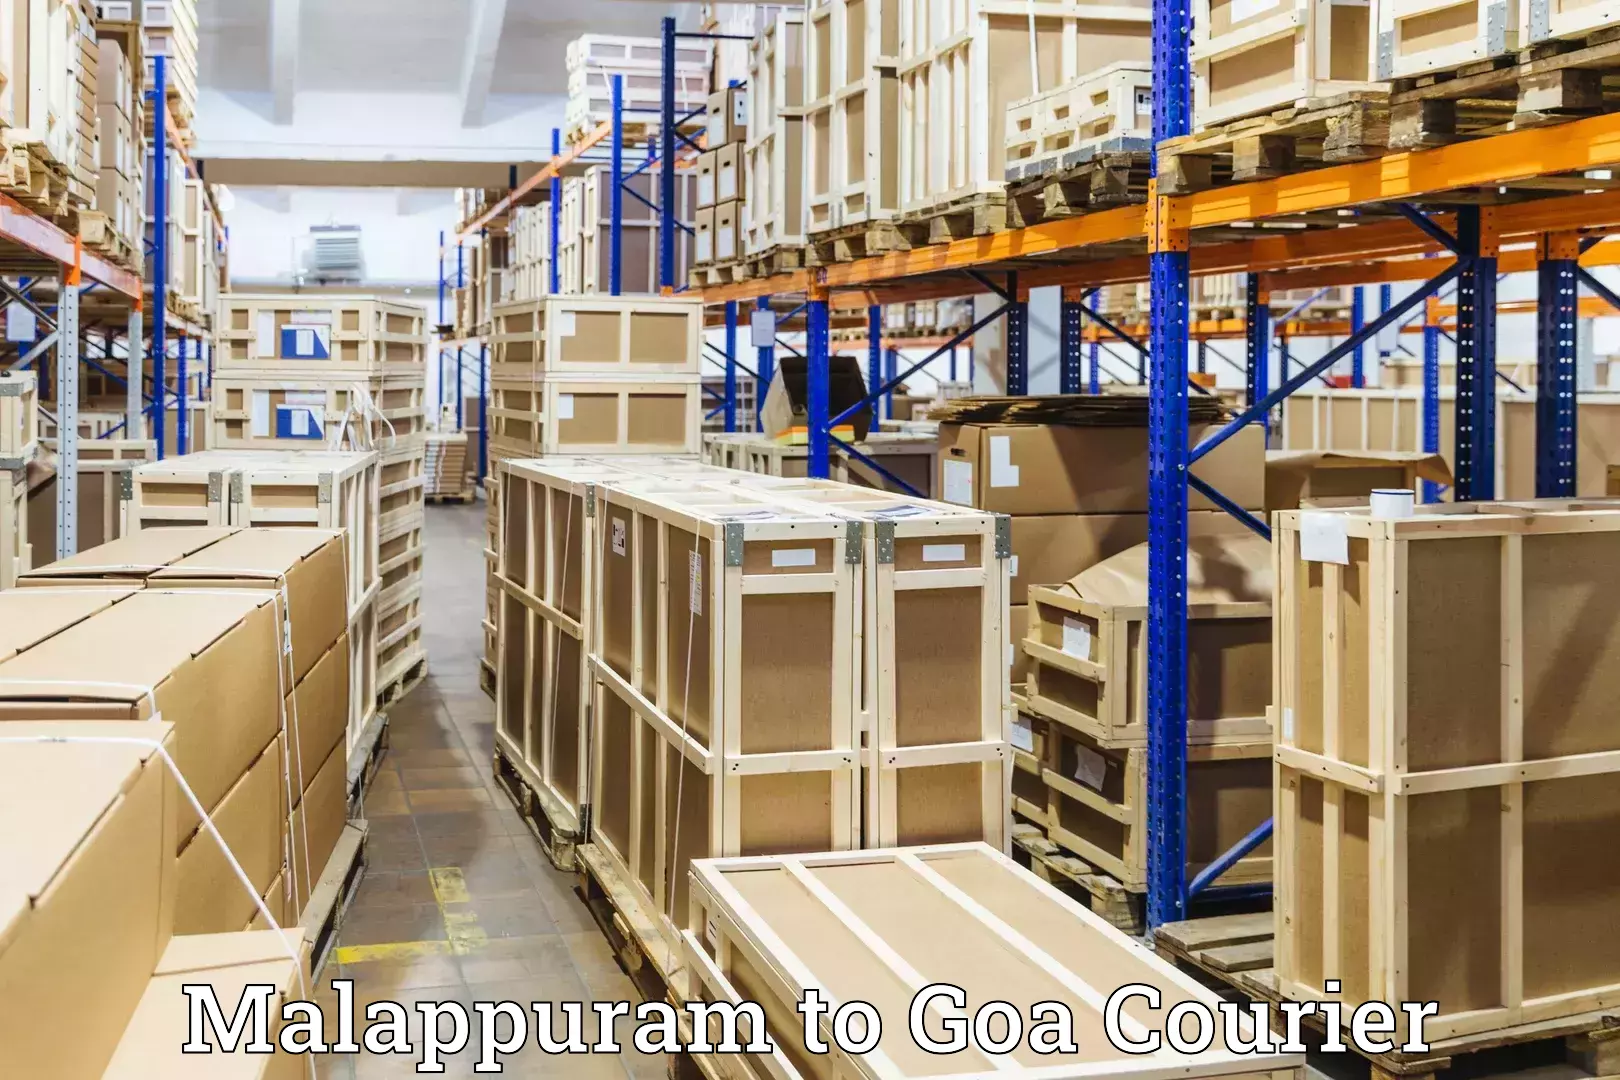 Luggage delivery network Malappuram to Goa